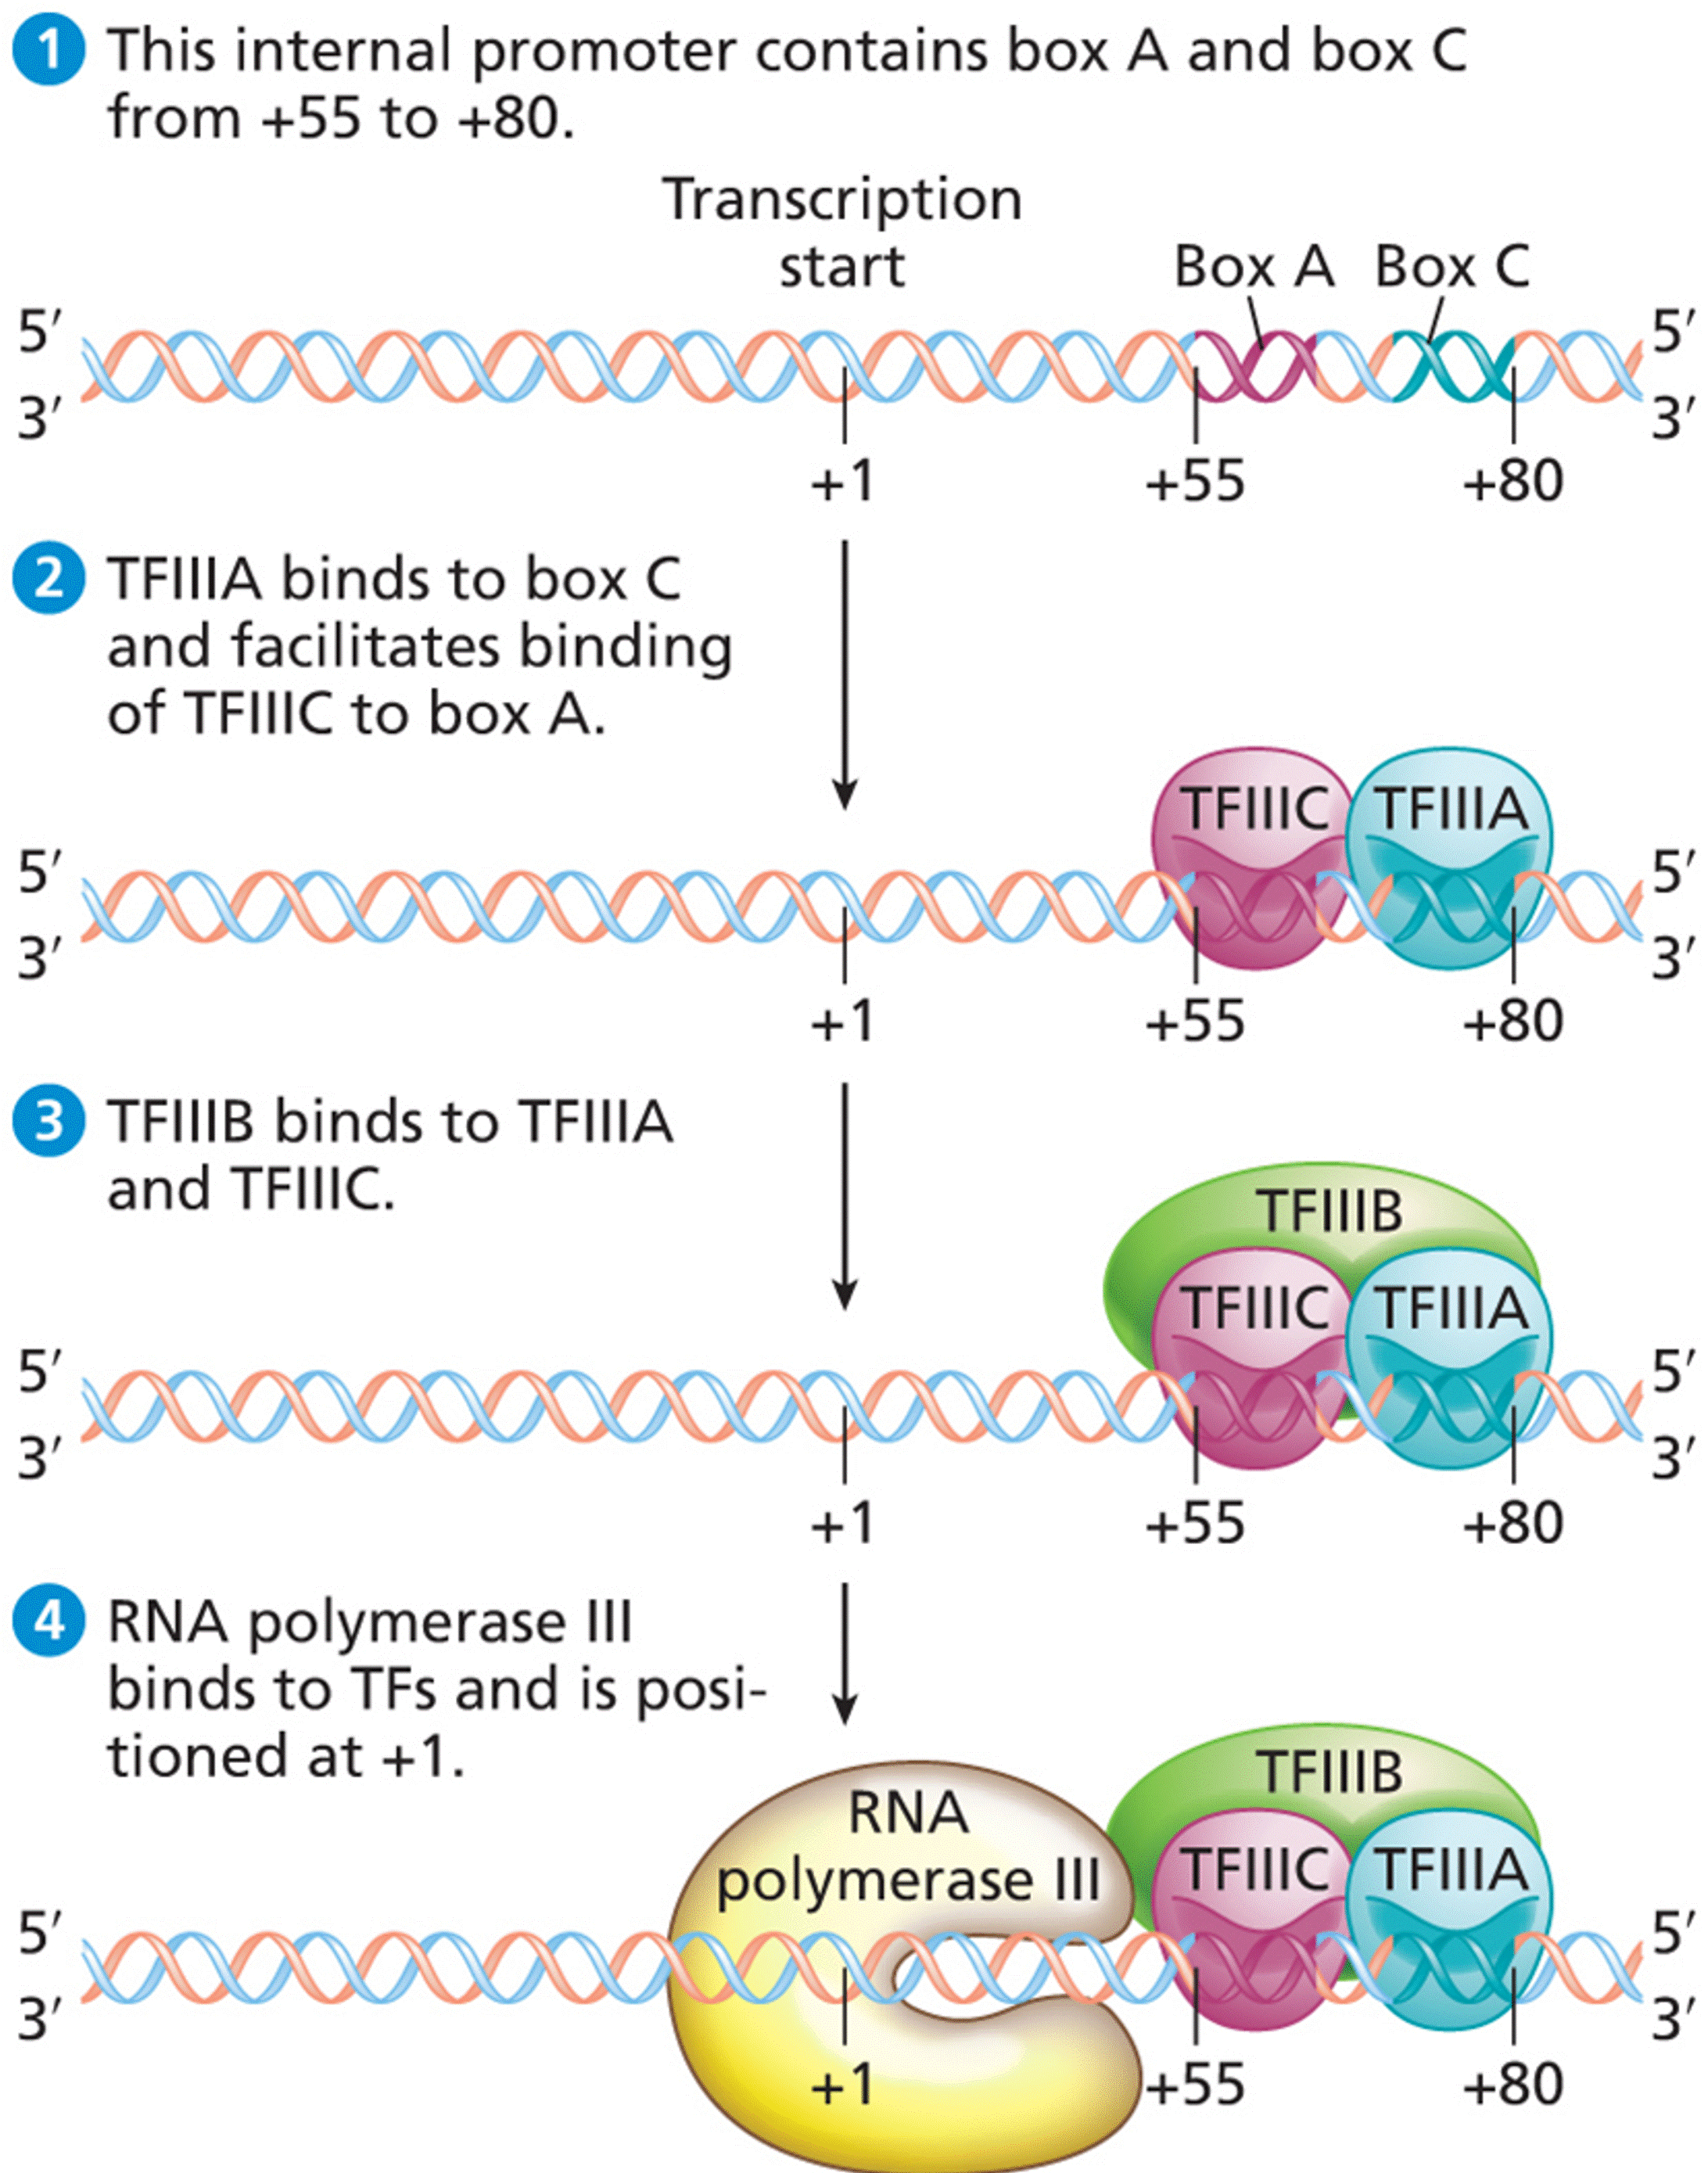 An internal promoter for transcription by RNA polymerase III